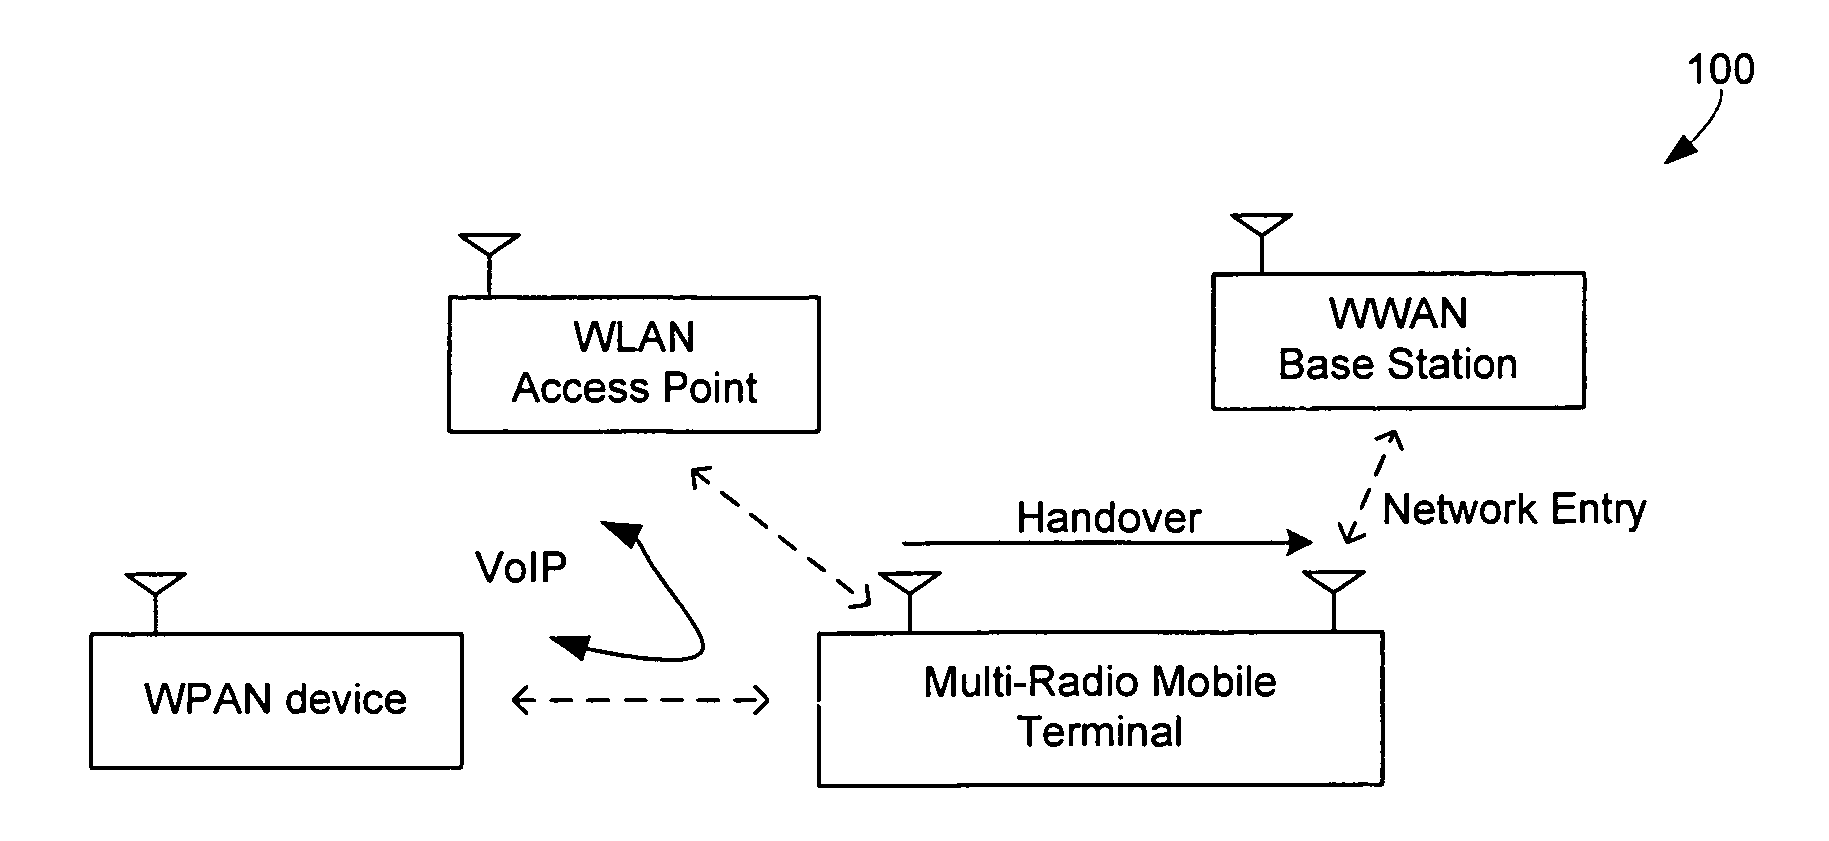 Techniques to improve co-existence among multiple radios